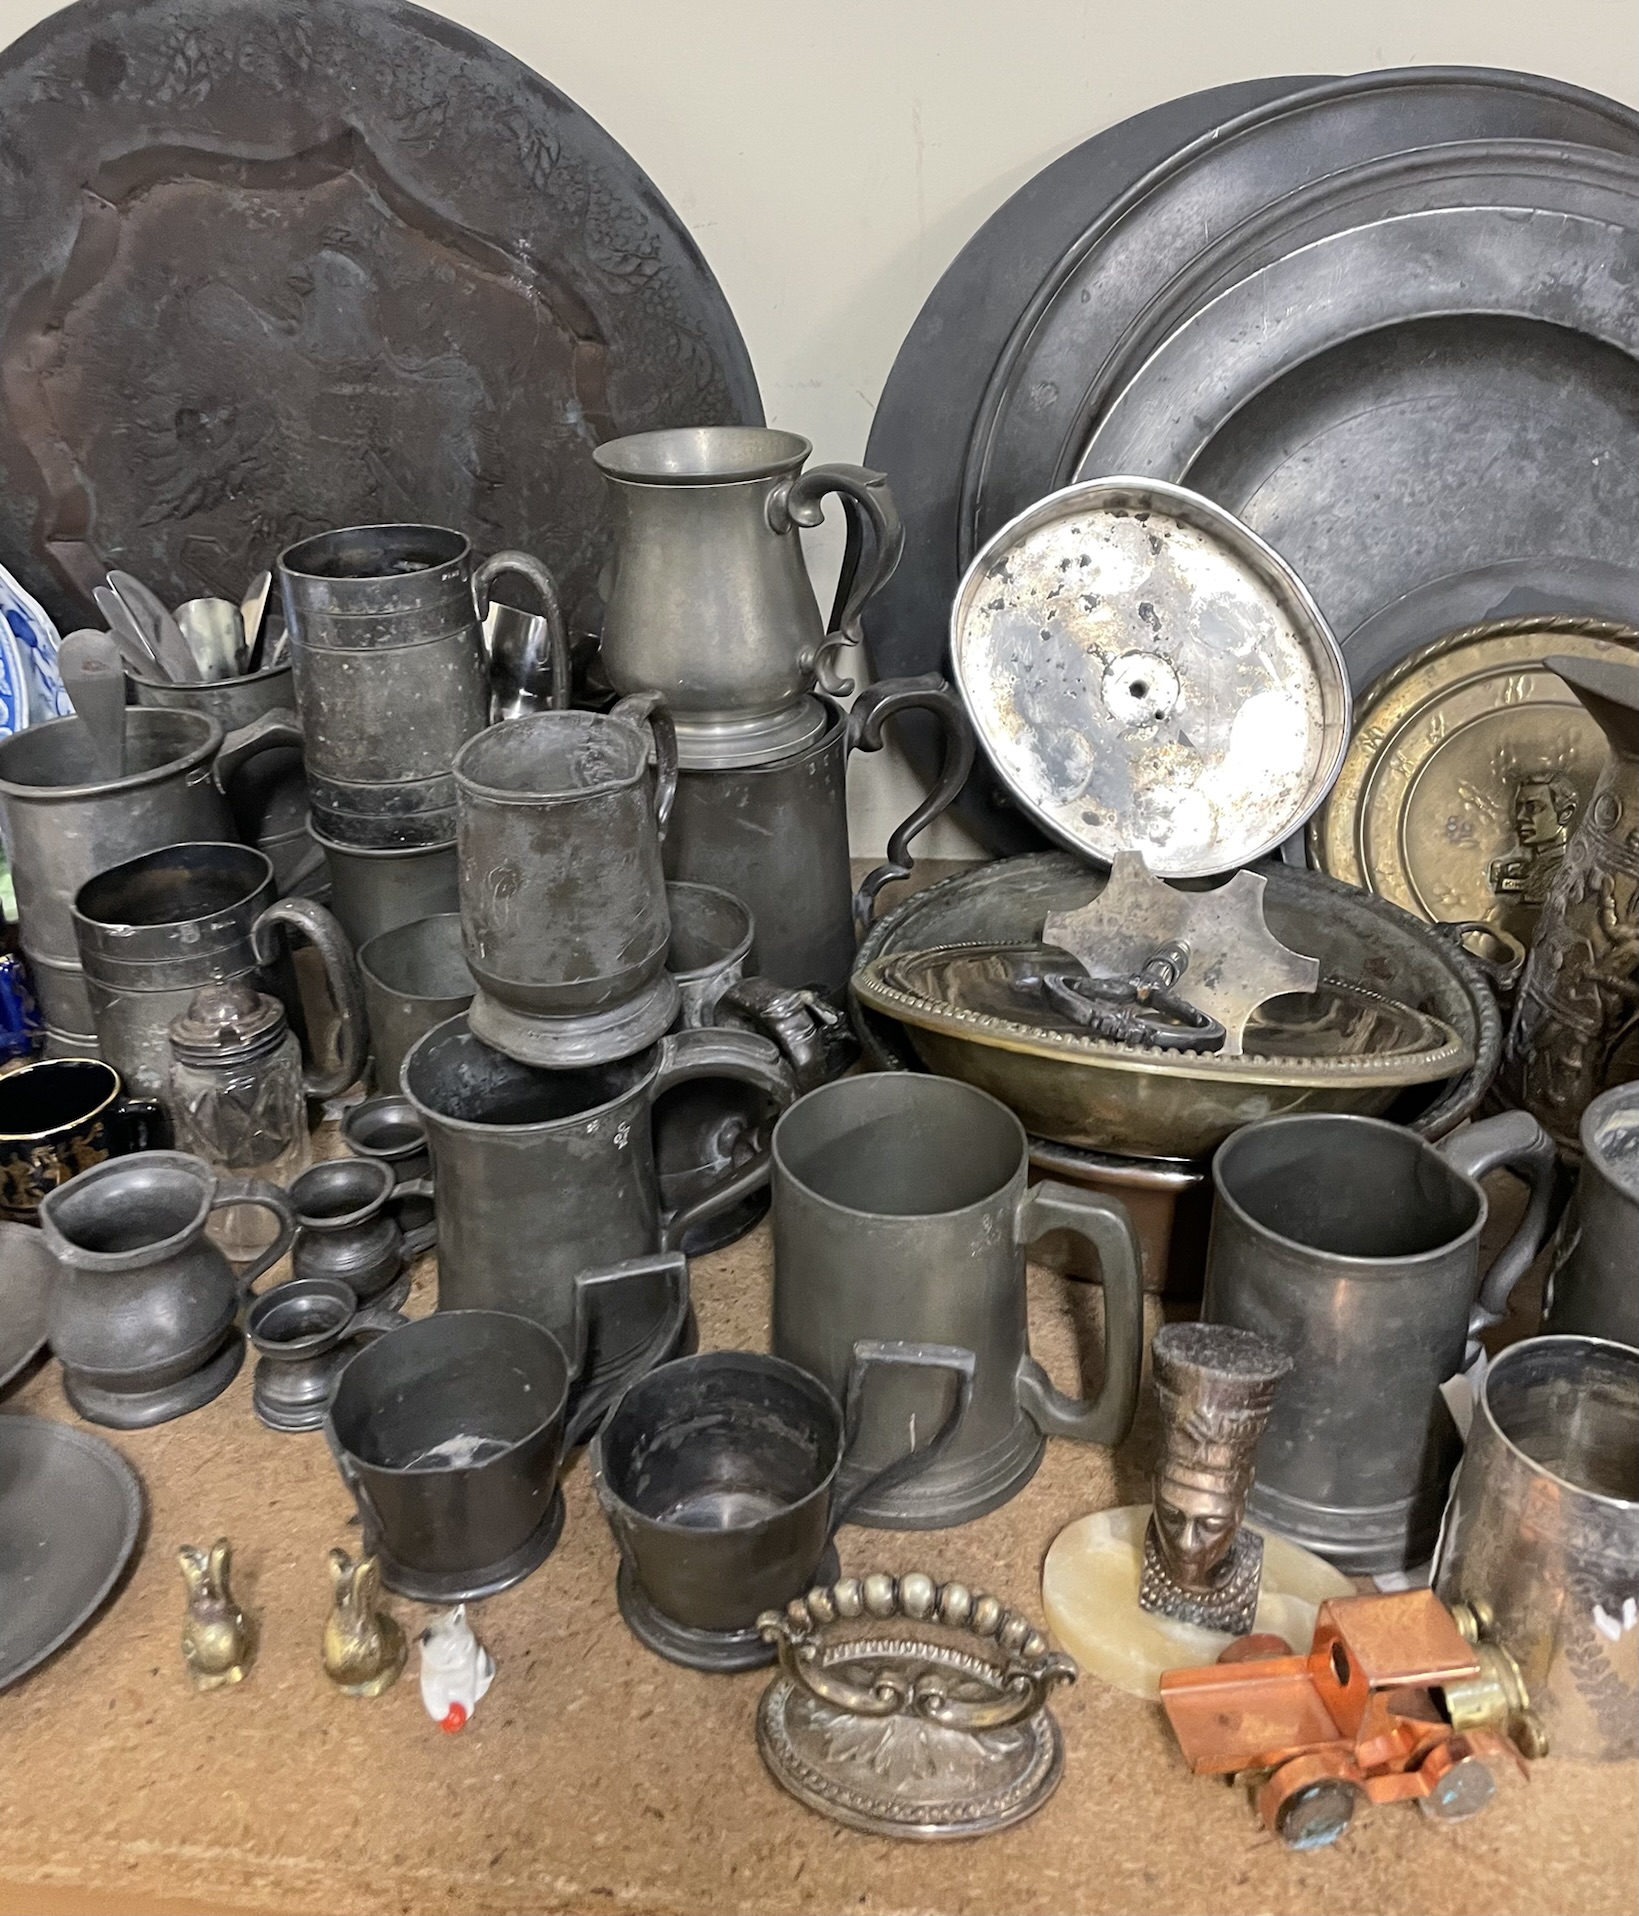 A collection of Pewter chargers, pewter tankards, electroplated wares, commemorative wares, - Image 4 of 4